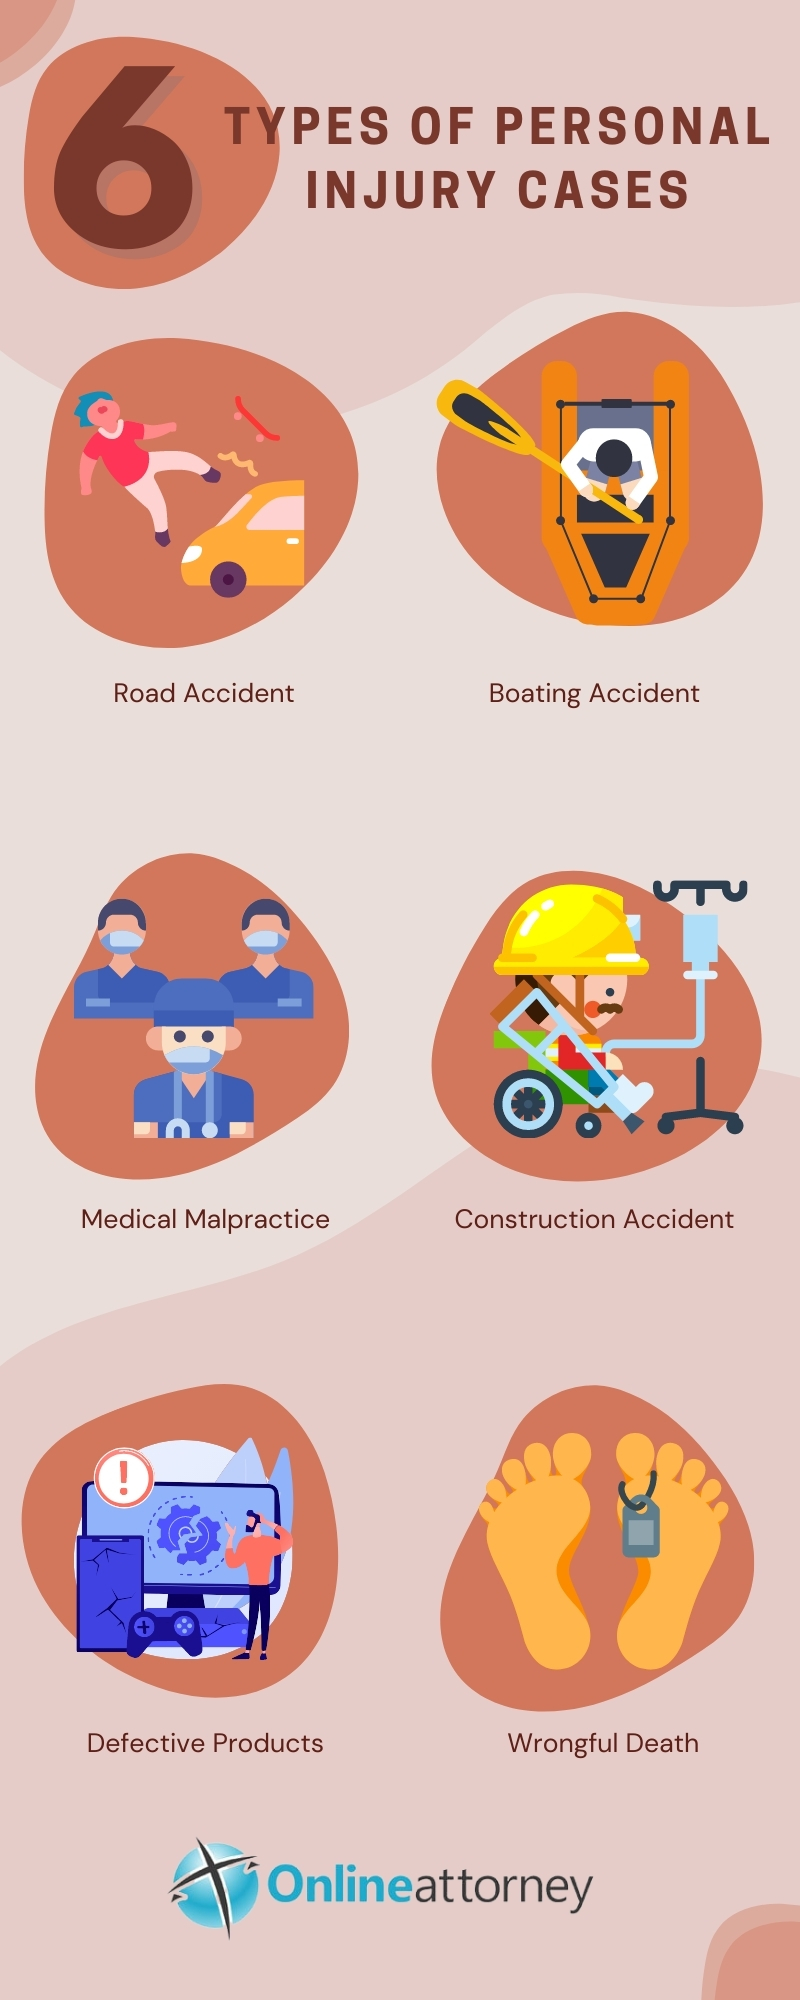 6 types of personal injury cases